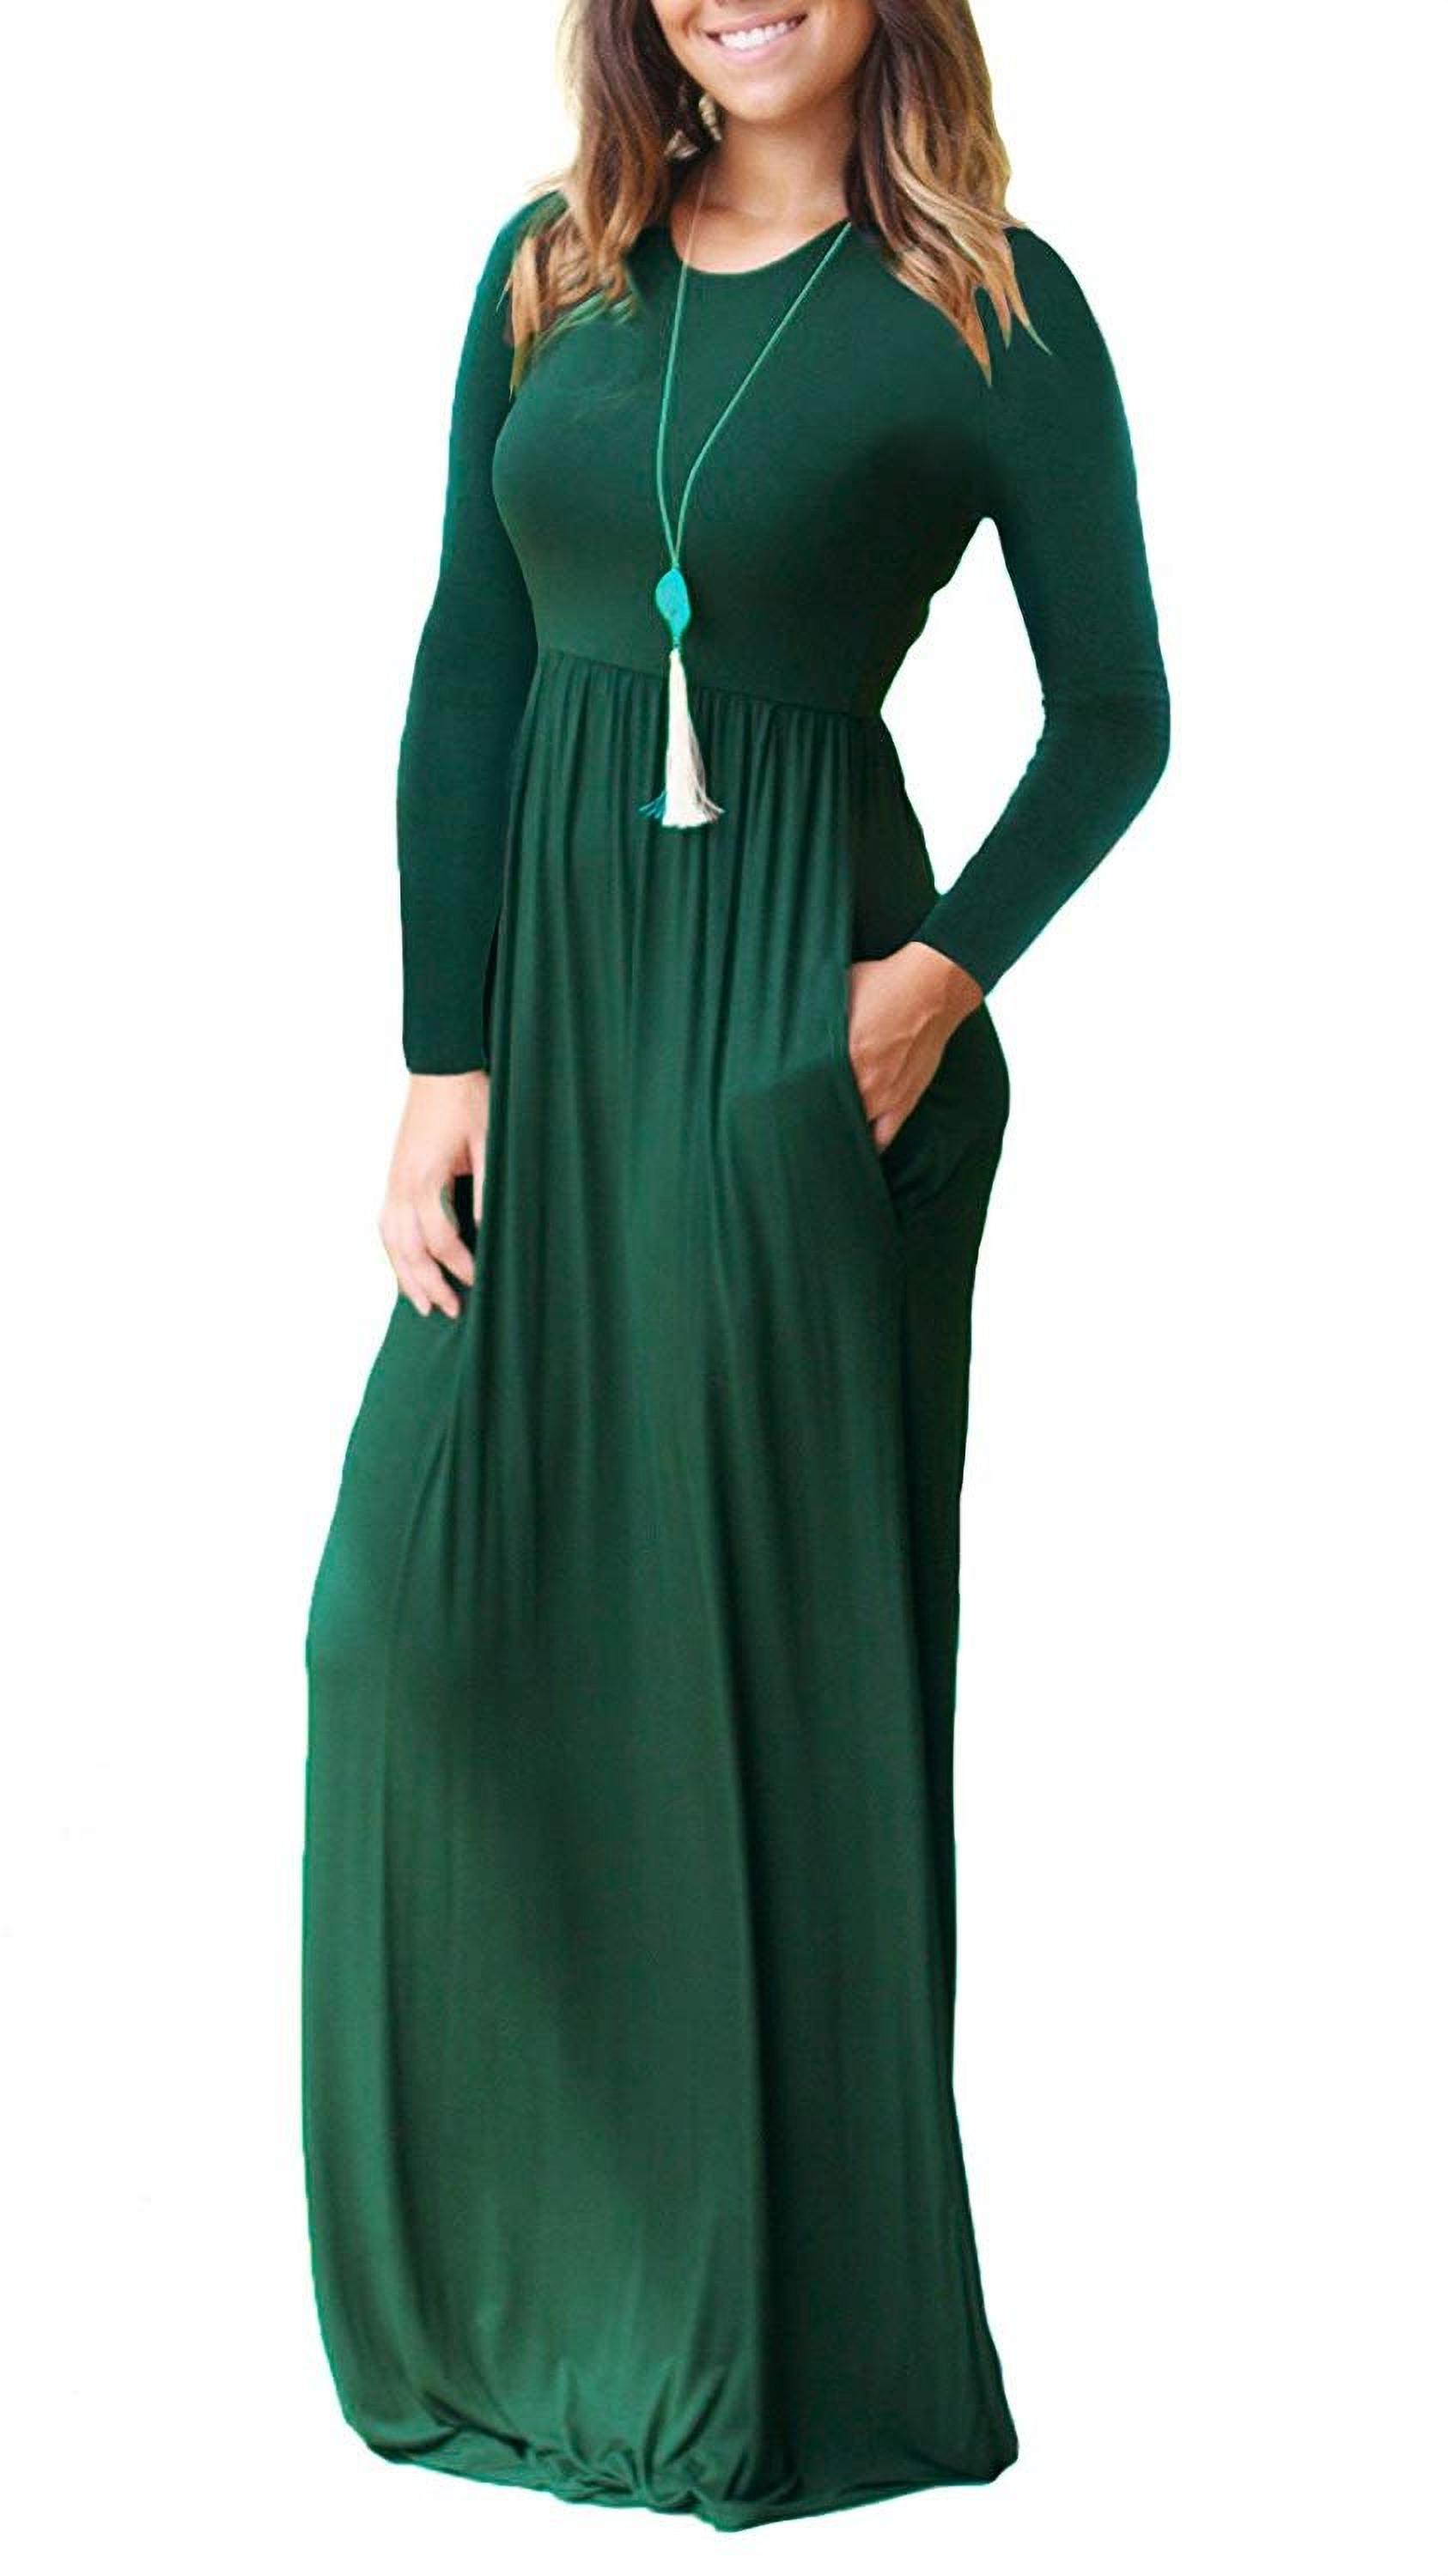 Aiyino Women's Maxi Dresses Long Sleeve Casual Long Dresses Loose with ...